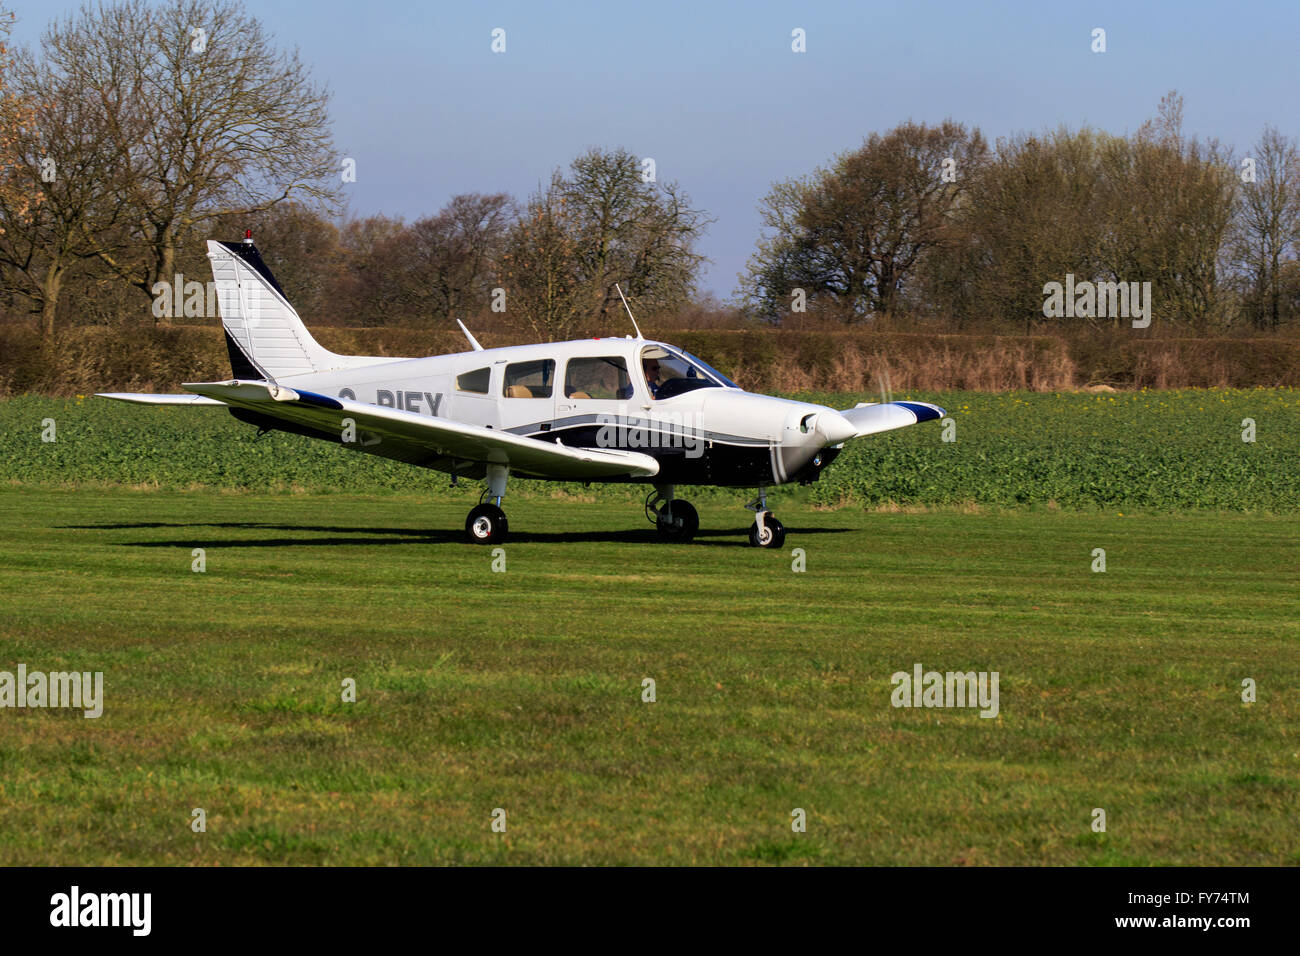 Piper PA-28-181 Cherokee Warrior G-BIEY commencing take-off run at Breighton Airfield Stock Photo